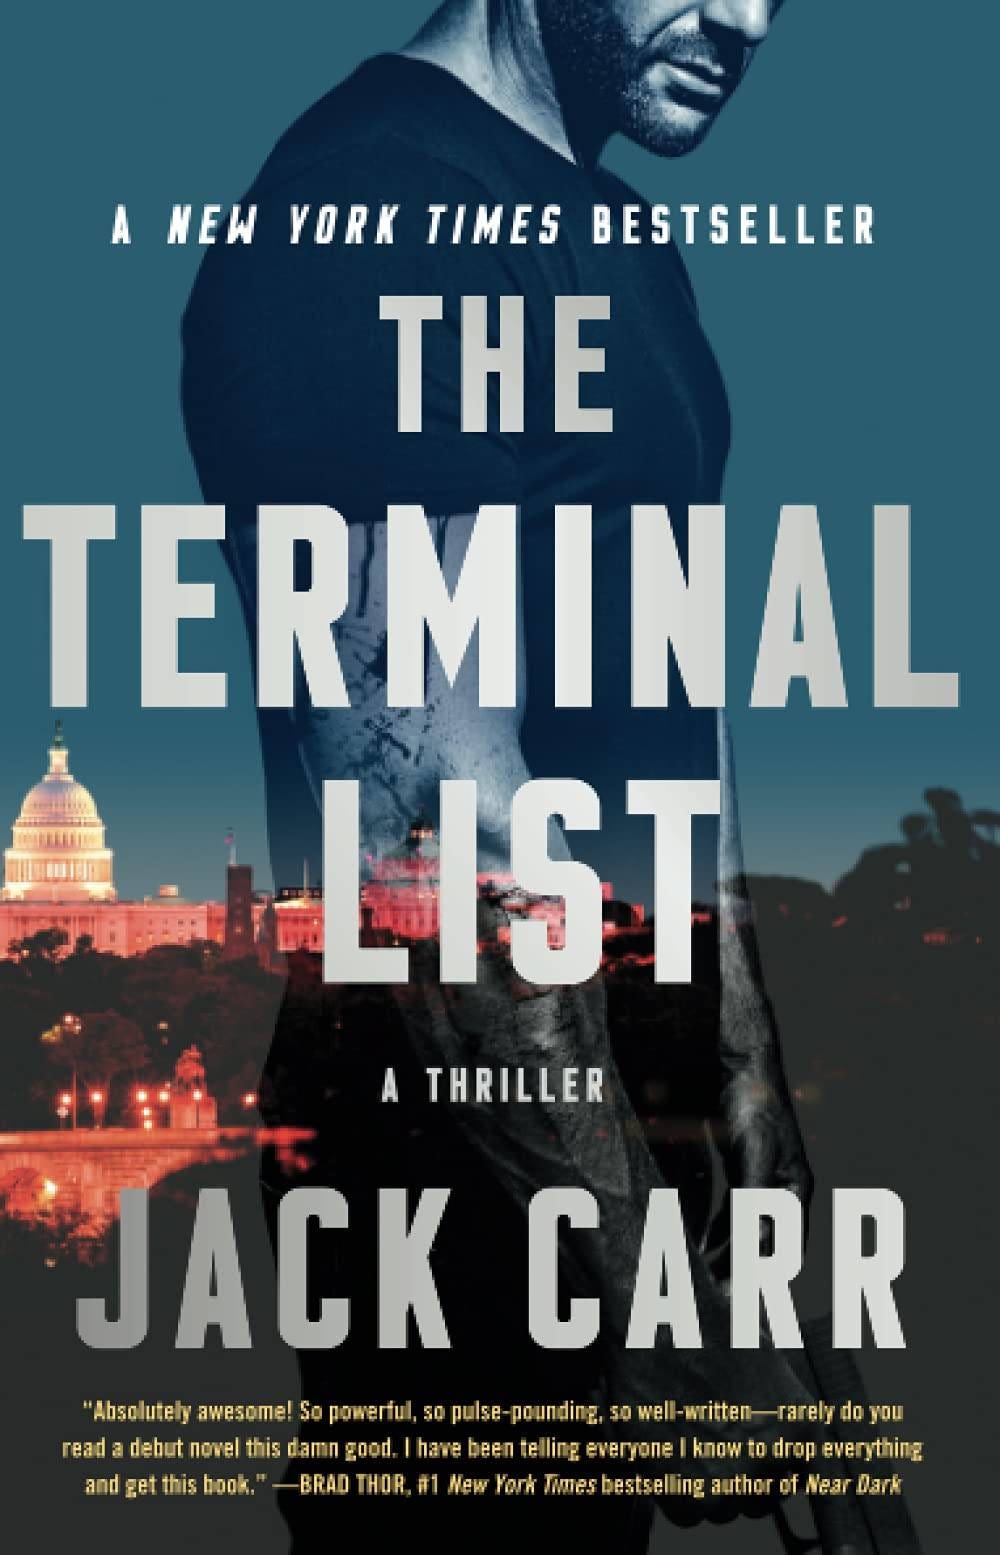 May be an image of 2 people and text that says 'NEW YORK TIMES BESTSELLER THE TERMINAL LIST THRILLER JACK CARR 'Absoluteh awesome! powerful, sQ pulse- pounding 50 written- rarel do you read debut novel this damn good, havebeen everyone know drop everything and getioo BRAD HOR, ਜ New Fork Mues bestsel ng uthor Near Dark'